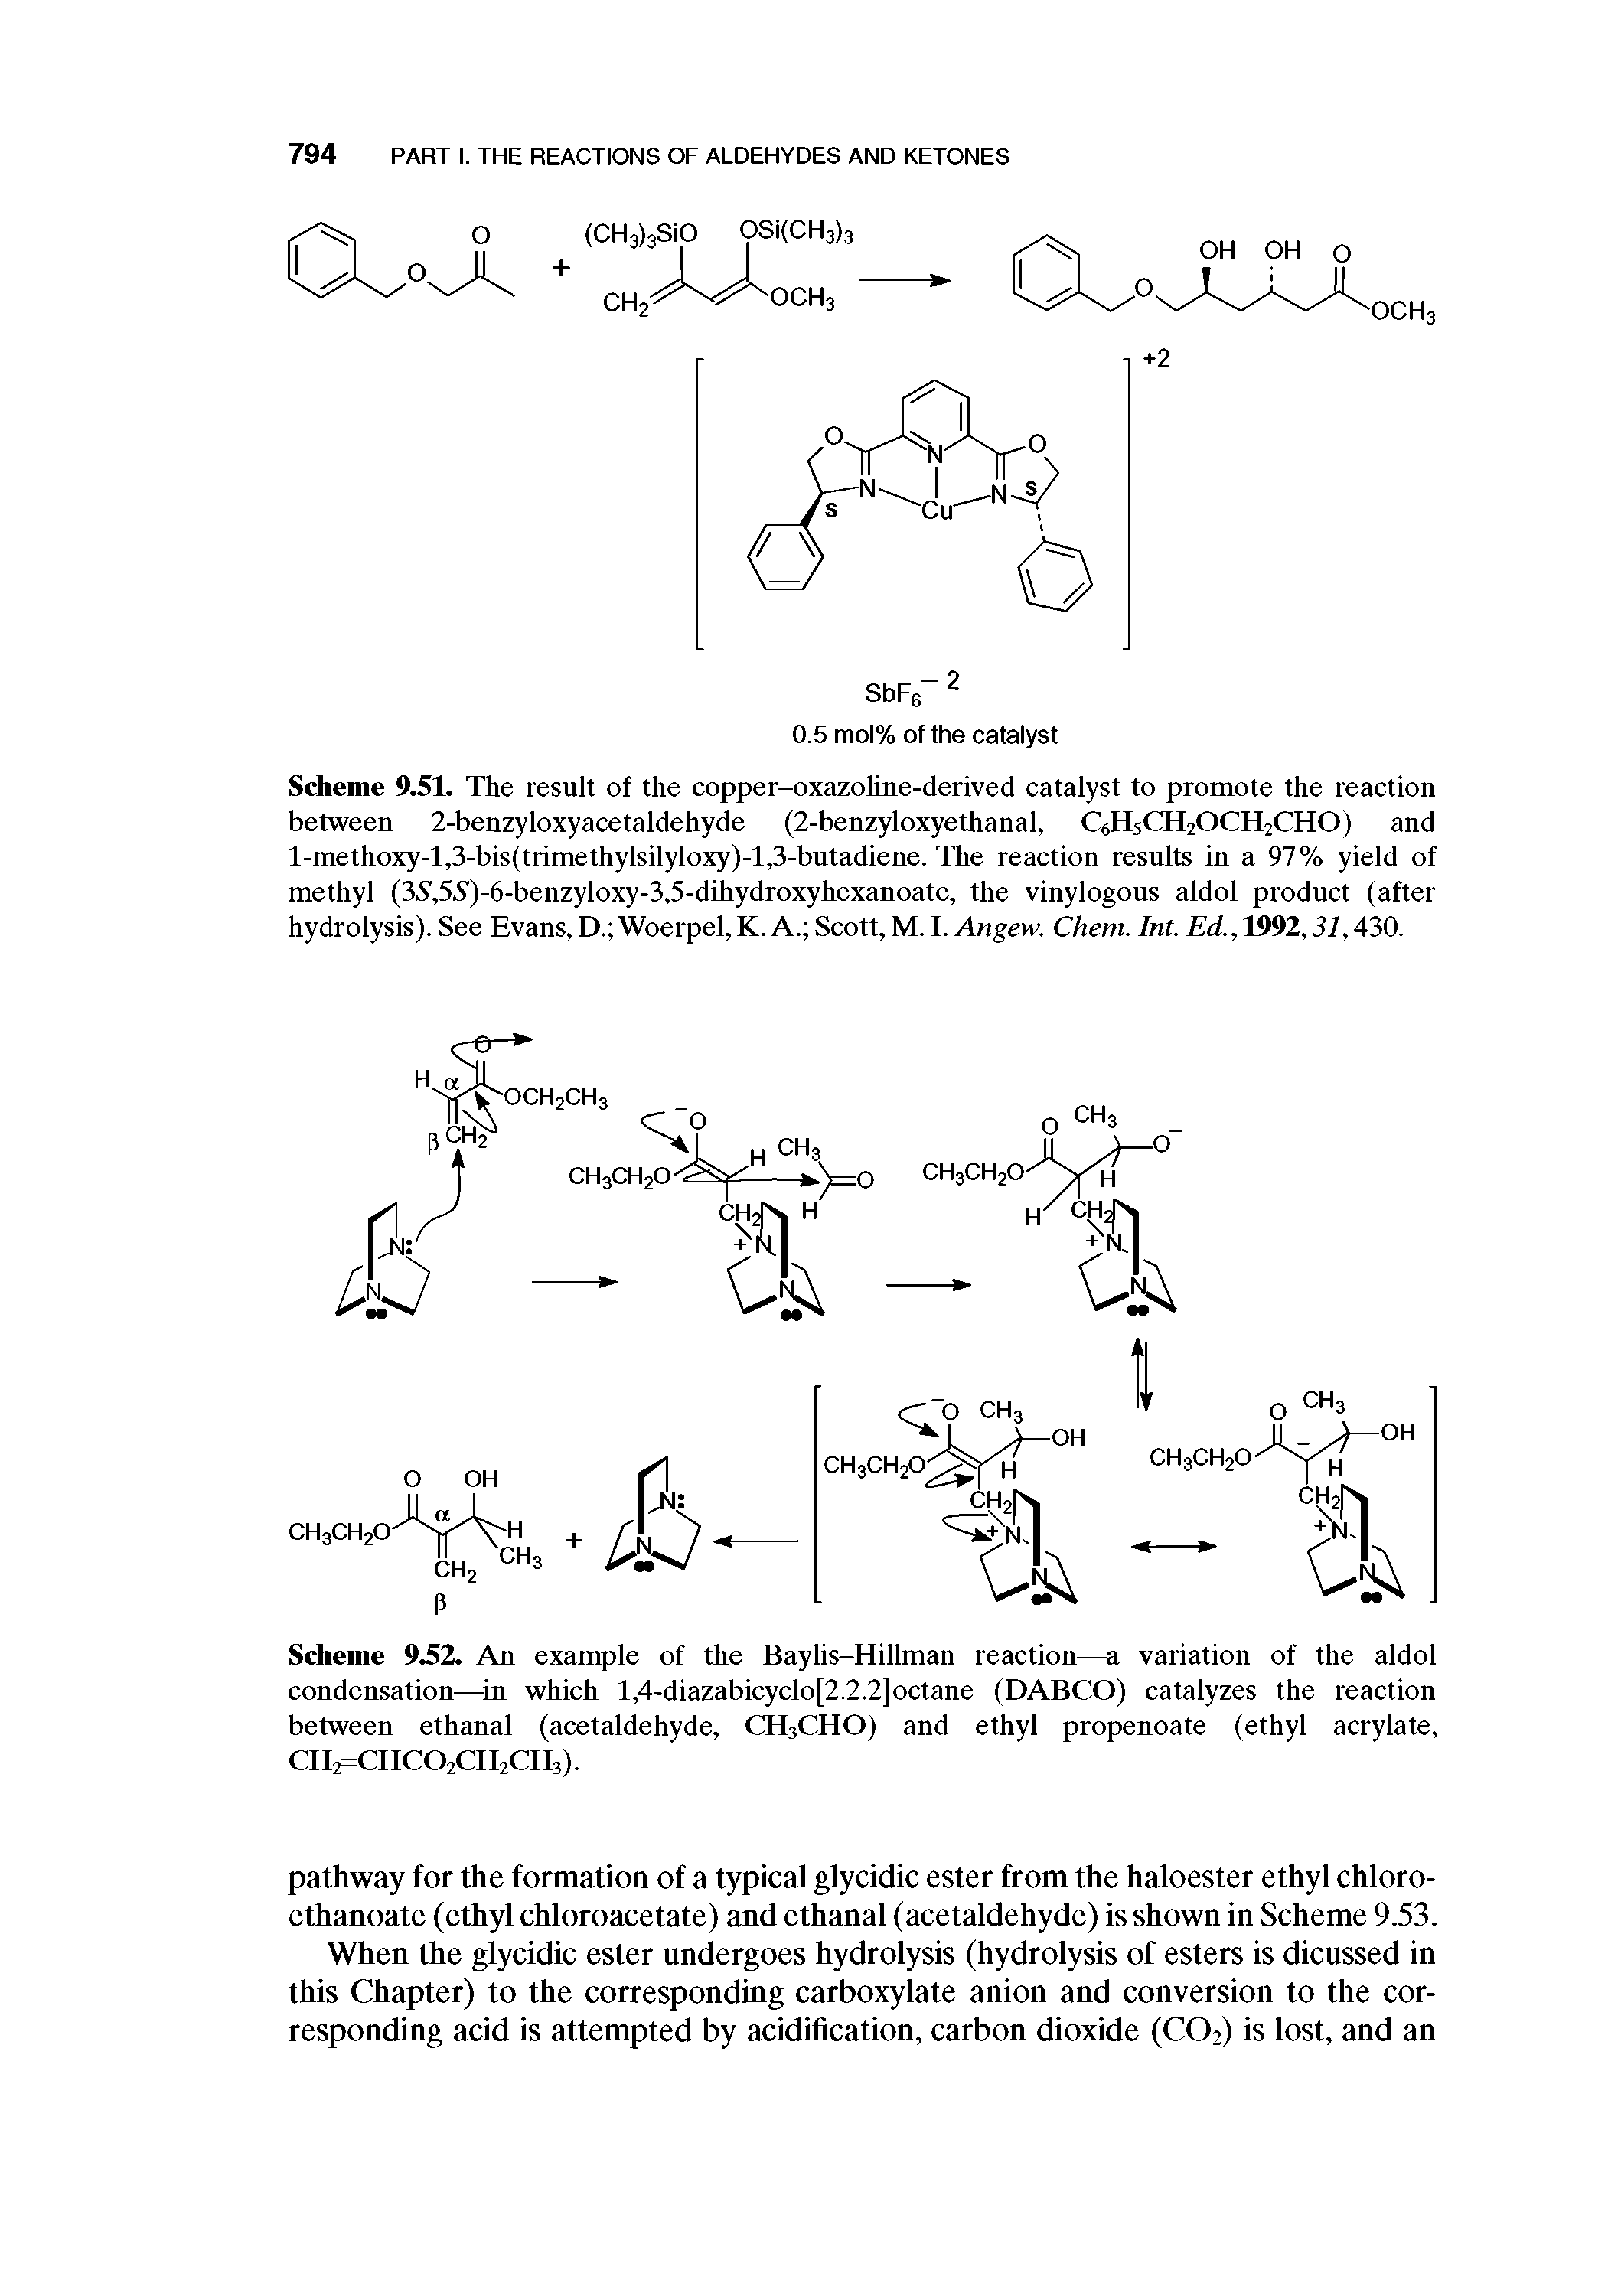 Scheme 9.51. The result of the copper-oxazohne-derived catalyst to promote the reaction between 2-benzyloxyacetaldehyde (2-benzyloxyethanal, C6HSCH2OCH2CHO) and l-methoxy-l,3-bis(trimethylsilyloxy)-13-butadiene. The reaction results in a 97% yield of methyl (35, 55 )-6-benzyloxy-3,5-dihydroxyhexanoate, the vinylogous aldol product (after hydrolysis). See Evans,D. Woerpel,K.A. Scott,M. I.ylngeH. Chem. Int. (i., 1992,57,430.